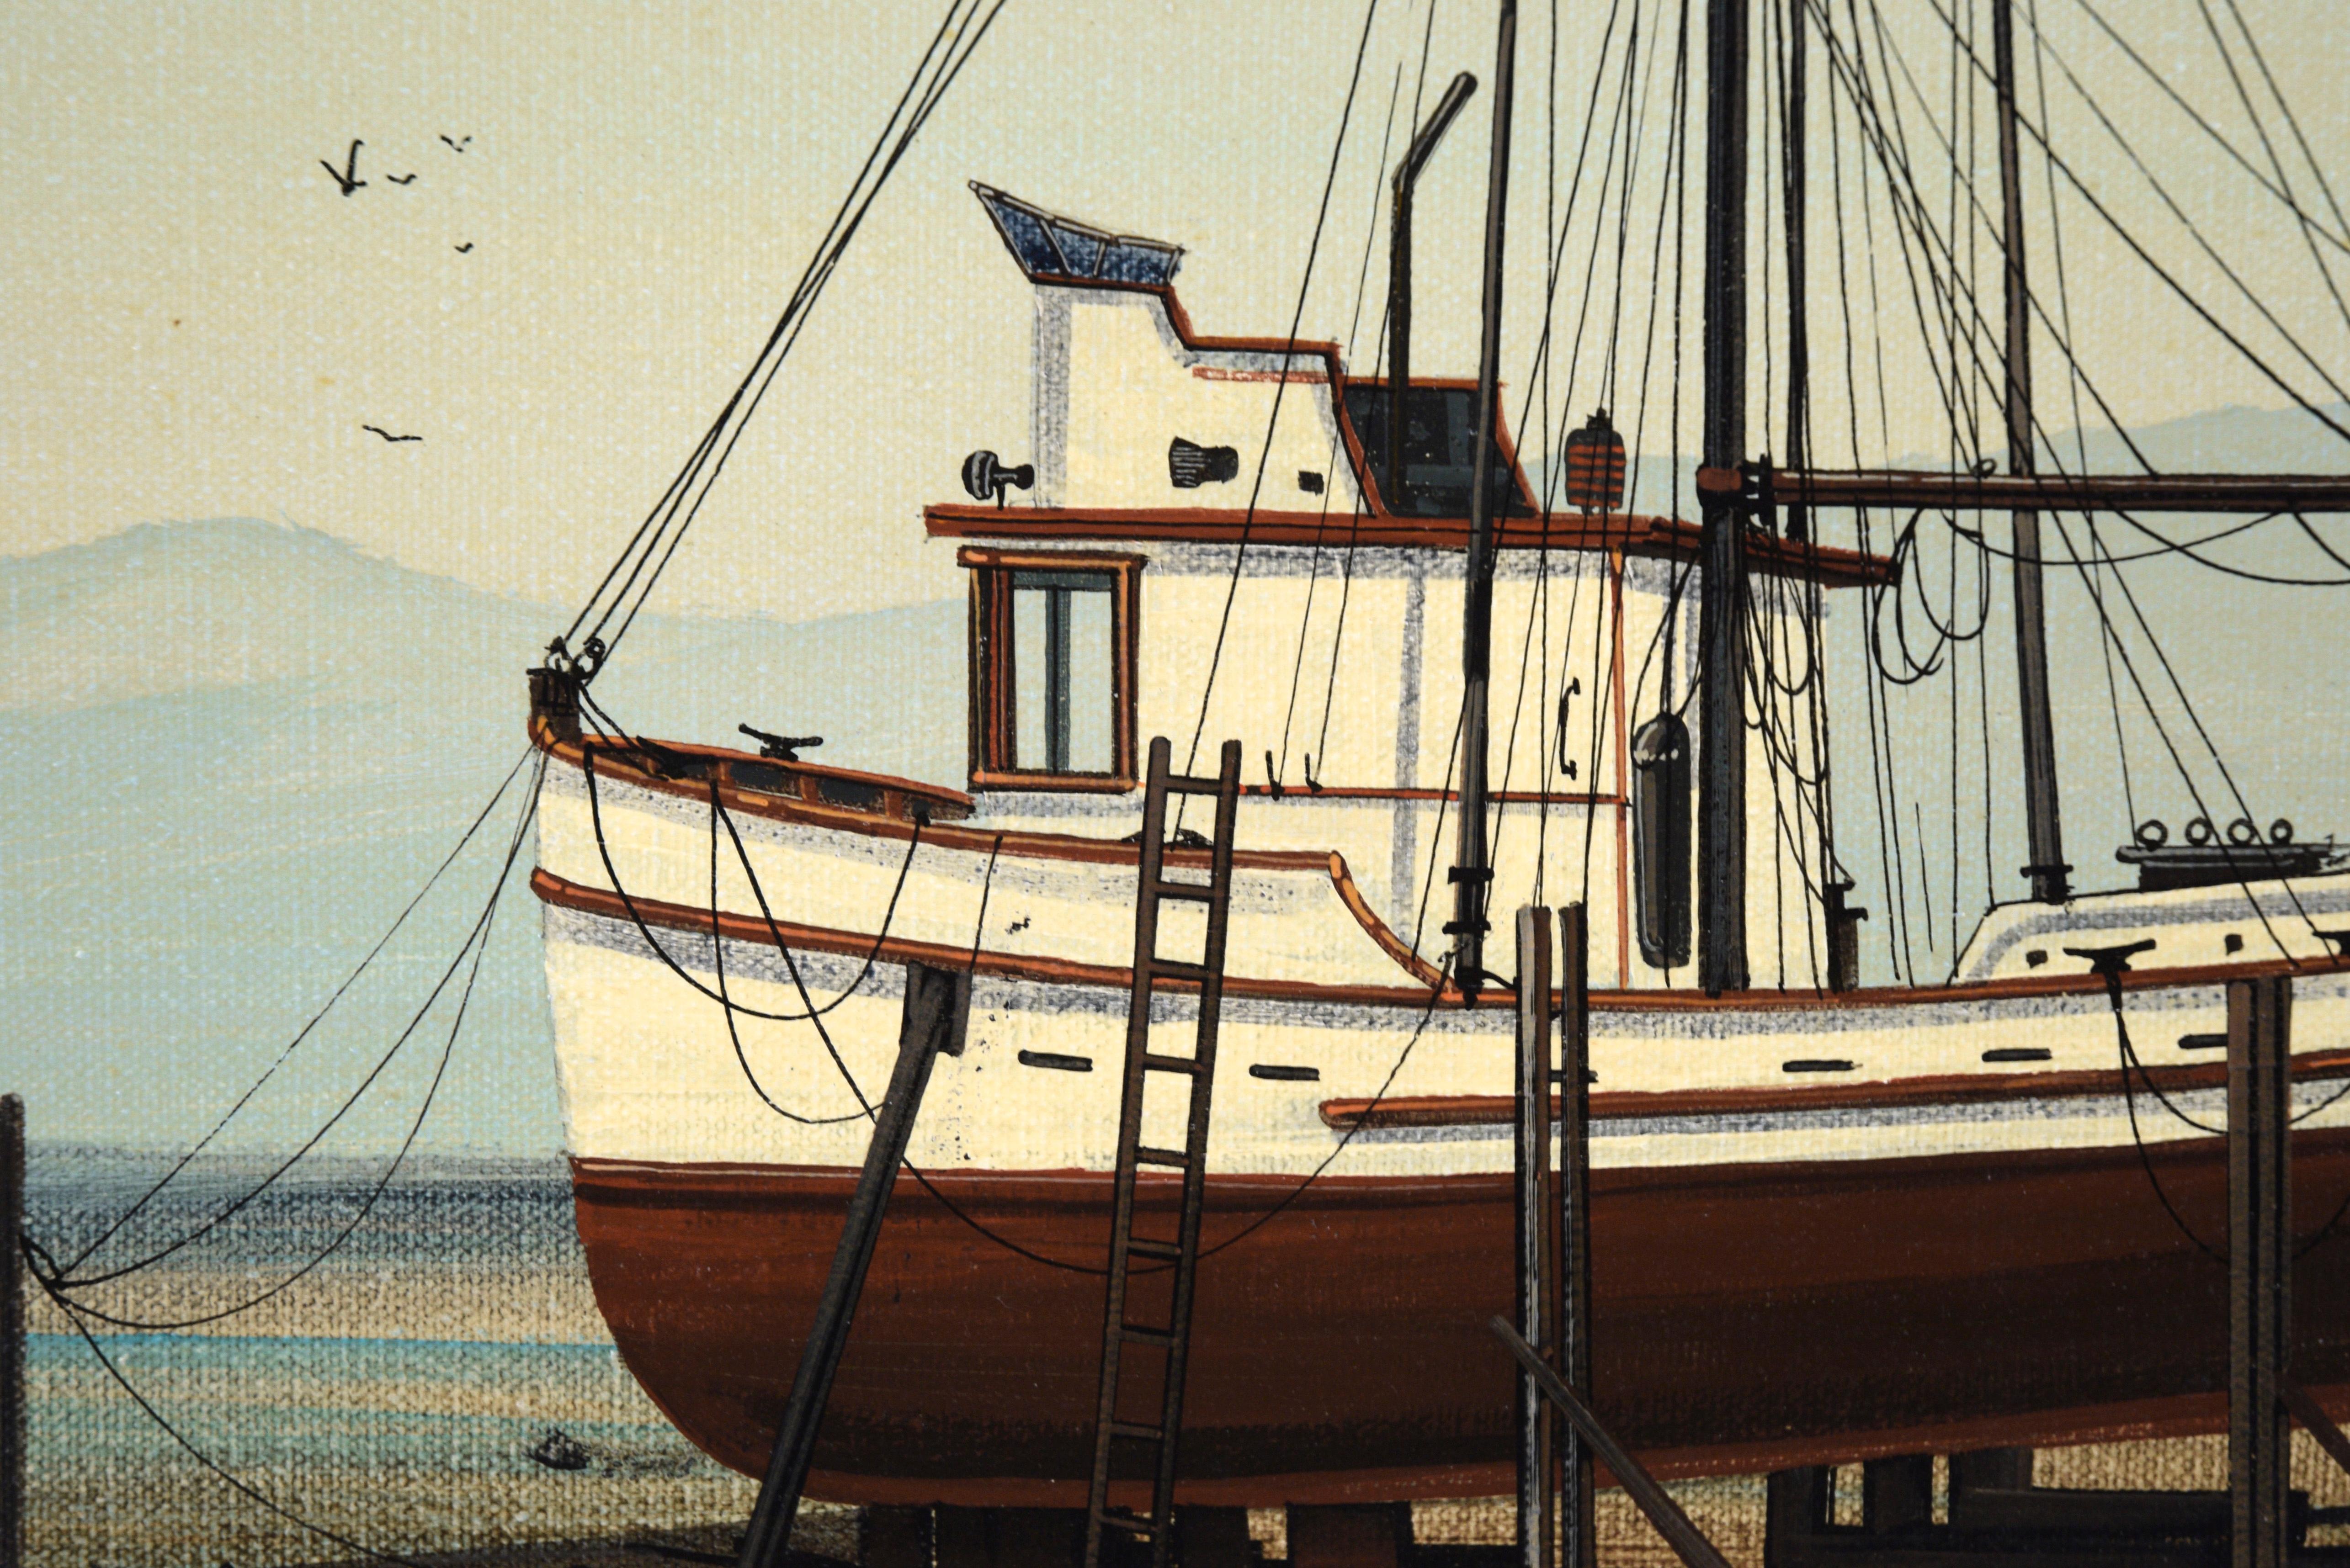 Fishing Boat in Dry Dock at the Shore - Oil on Canvas - Brown Landscape Painting by Glenn Scott Kuhnly